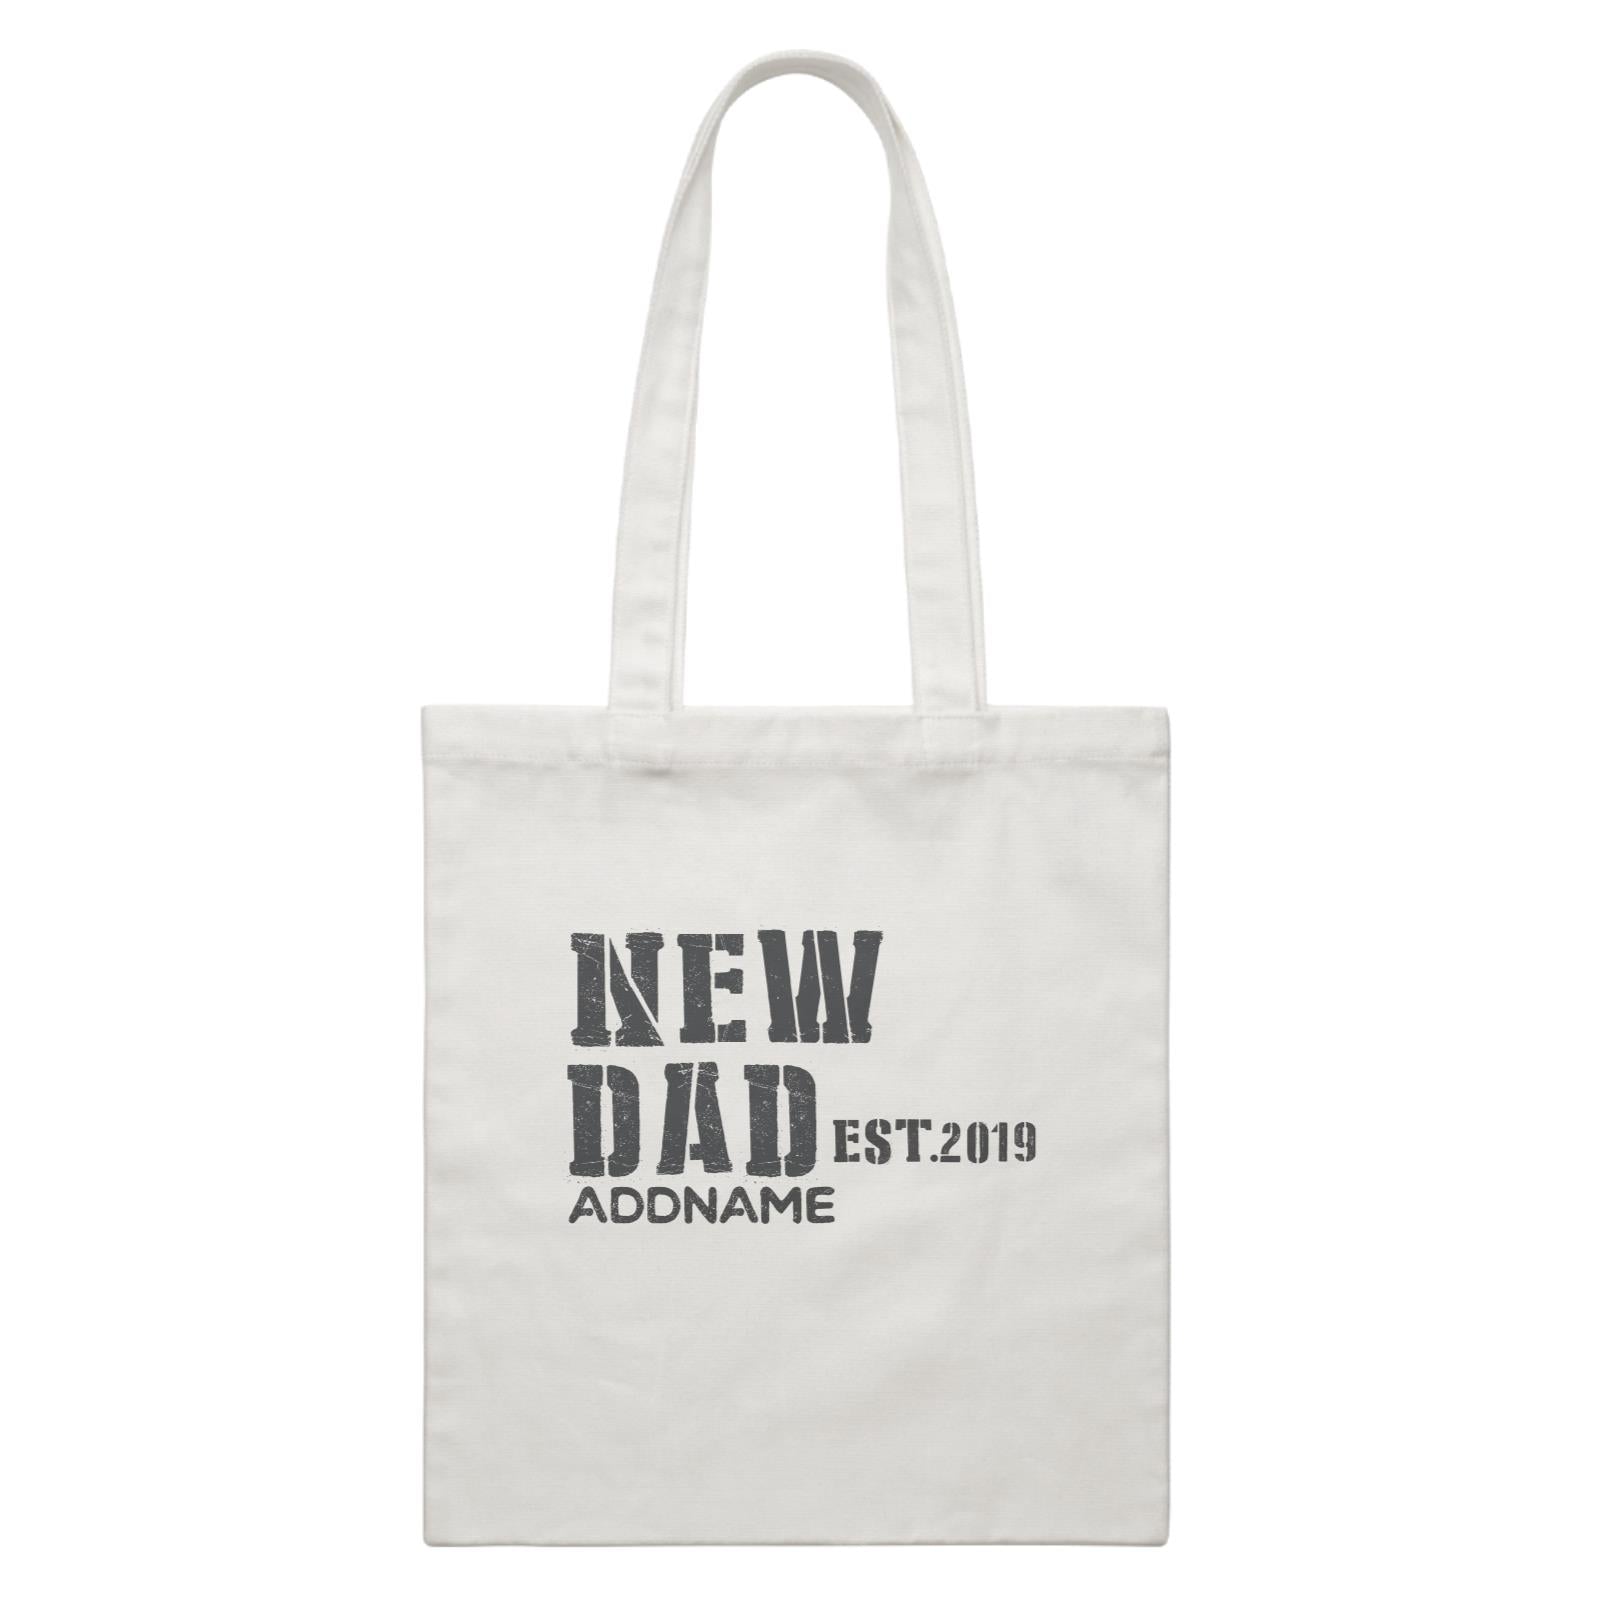 New Parent 1 New Dad Addname With Date White Canvas Bag